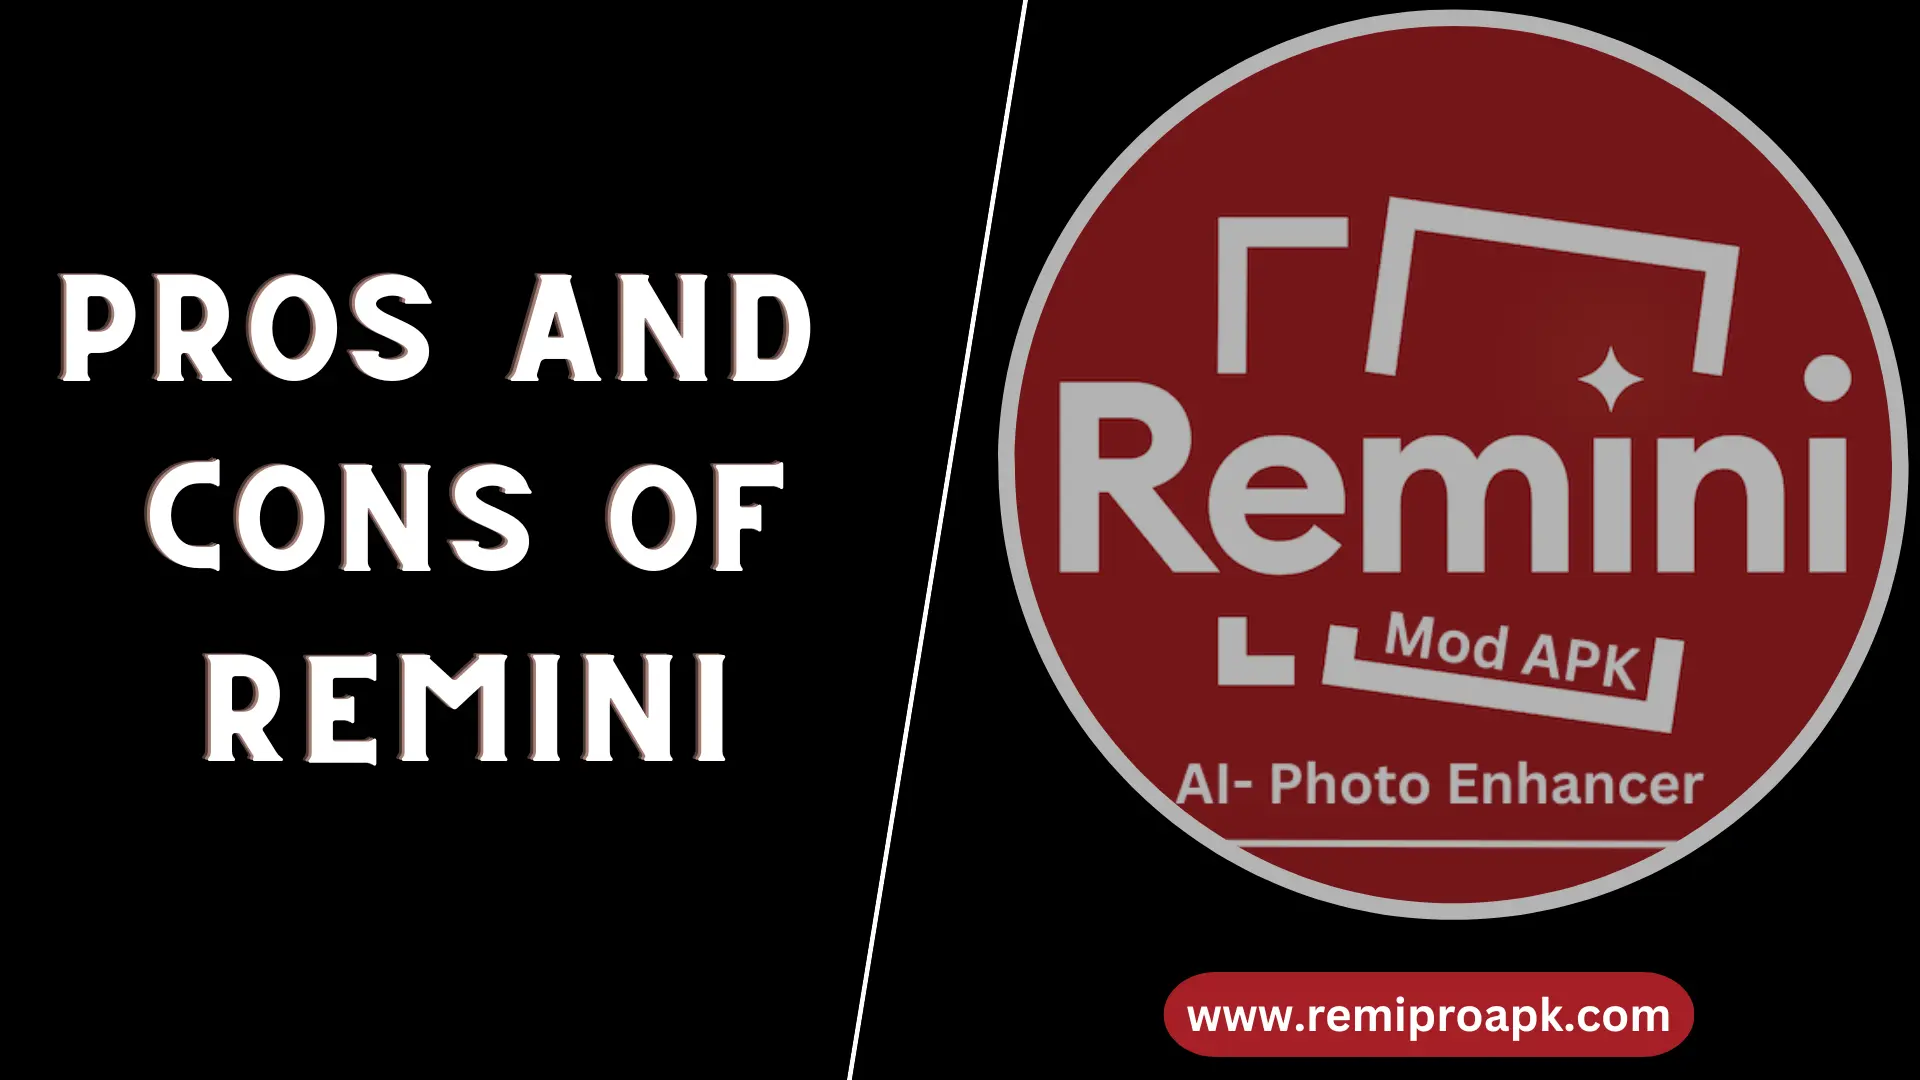 pros and cons of remini - featured image